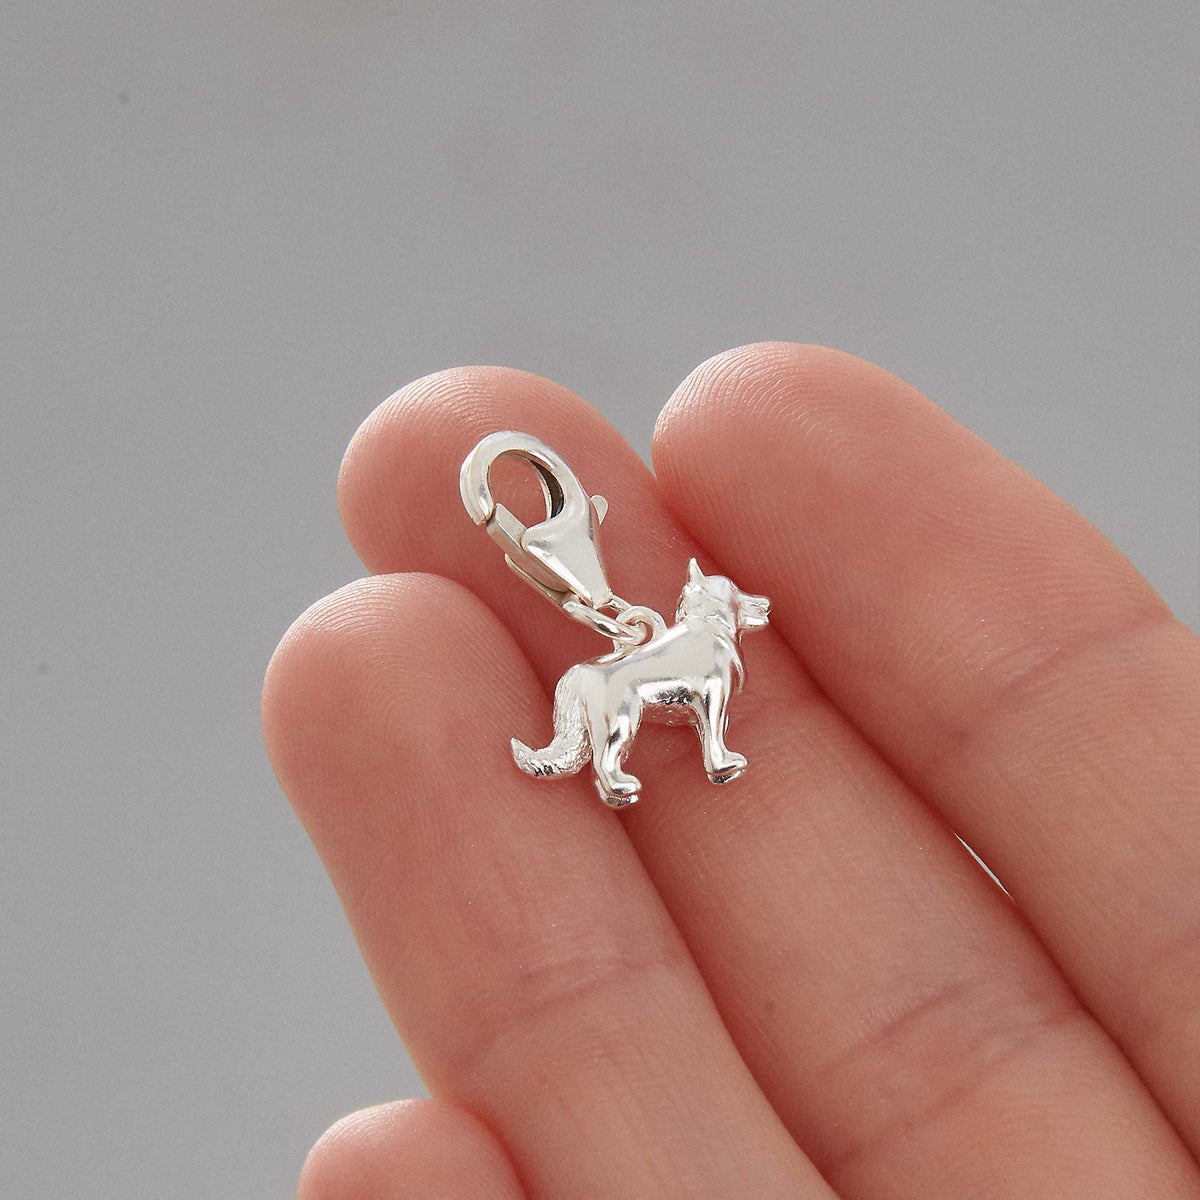 Border Collie breed solid sterling silver dog charm with clip clasp fits thomas sabo style by Scarlett Jewellery Ltd